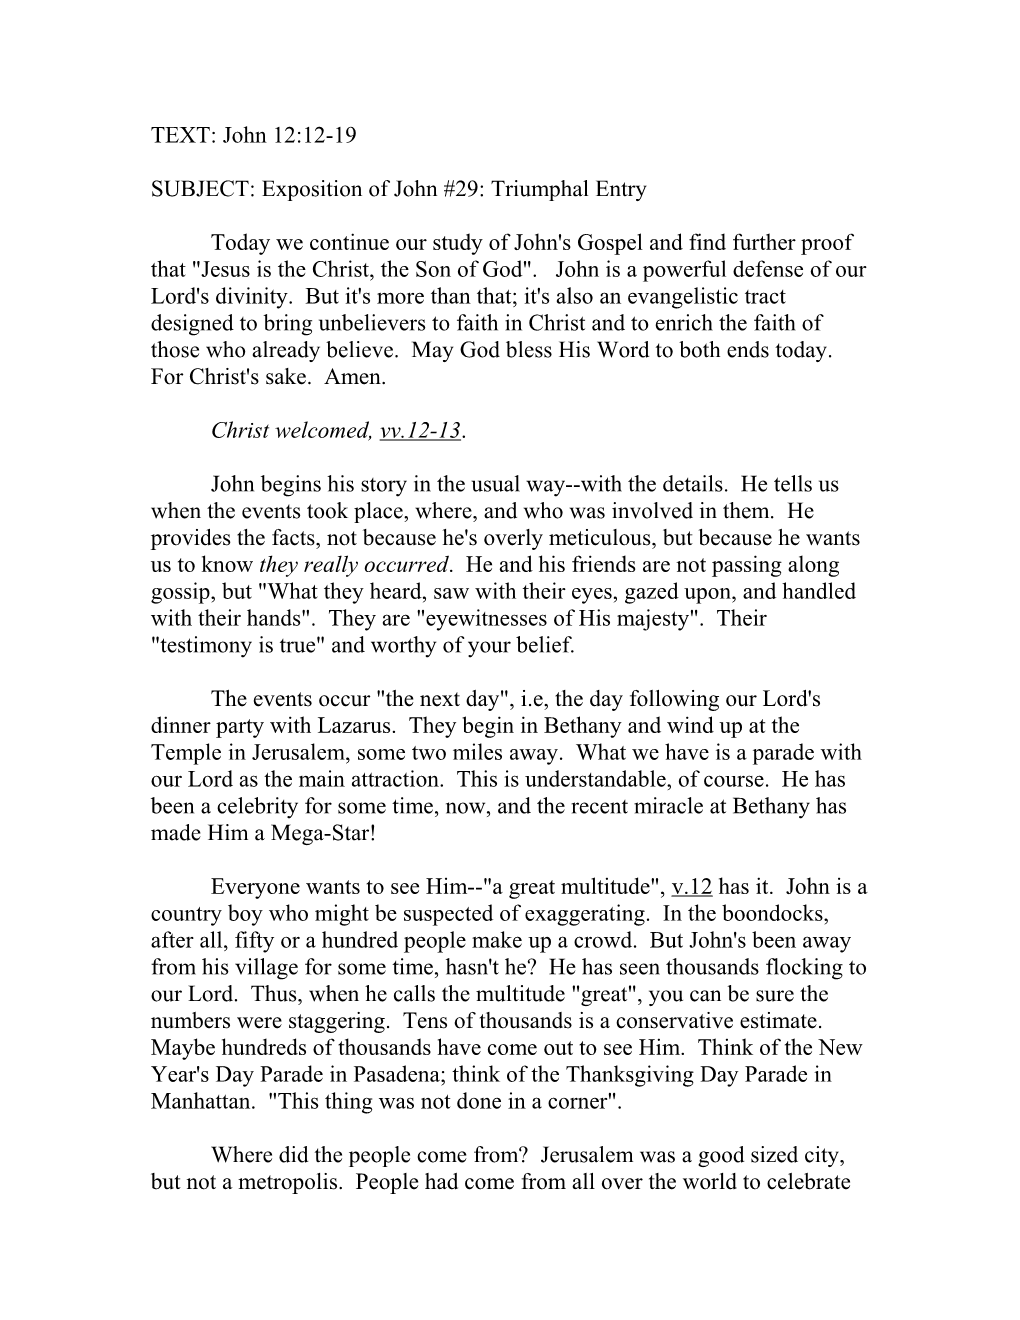 SUBJECT: Exposition of John #29: Triumphal Entry